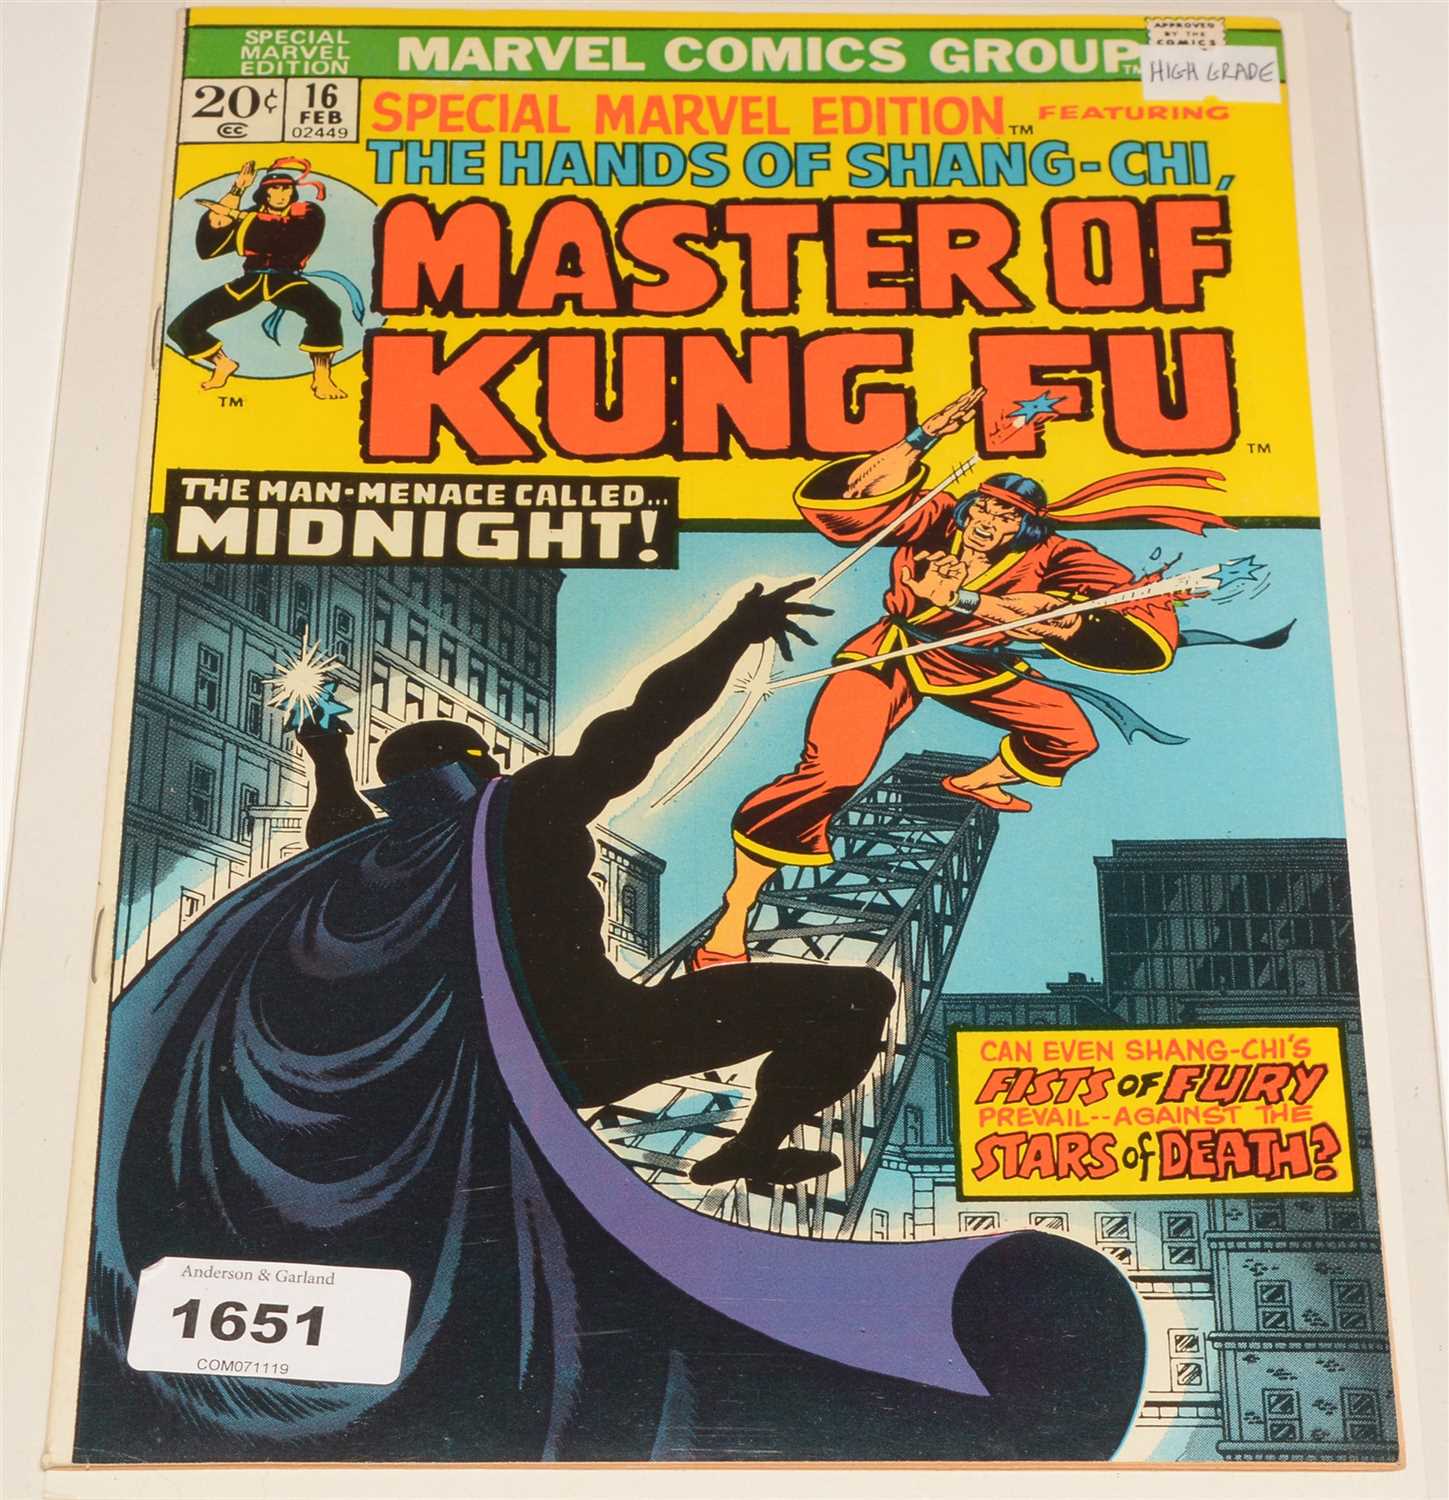 Lot 1651 - Special Marvel edition featuring Master of Kung Fu